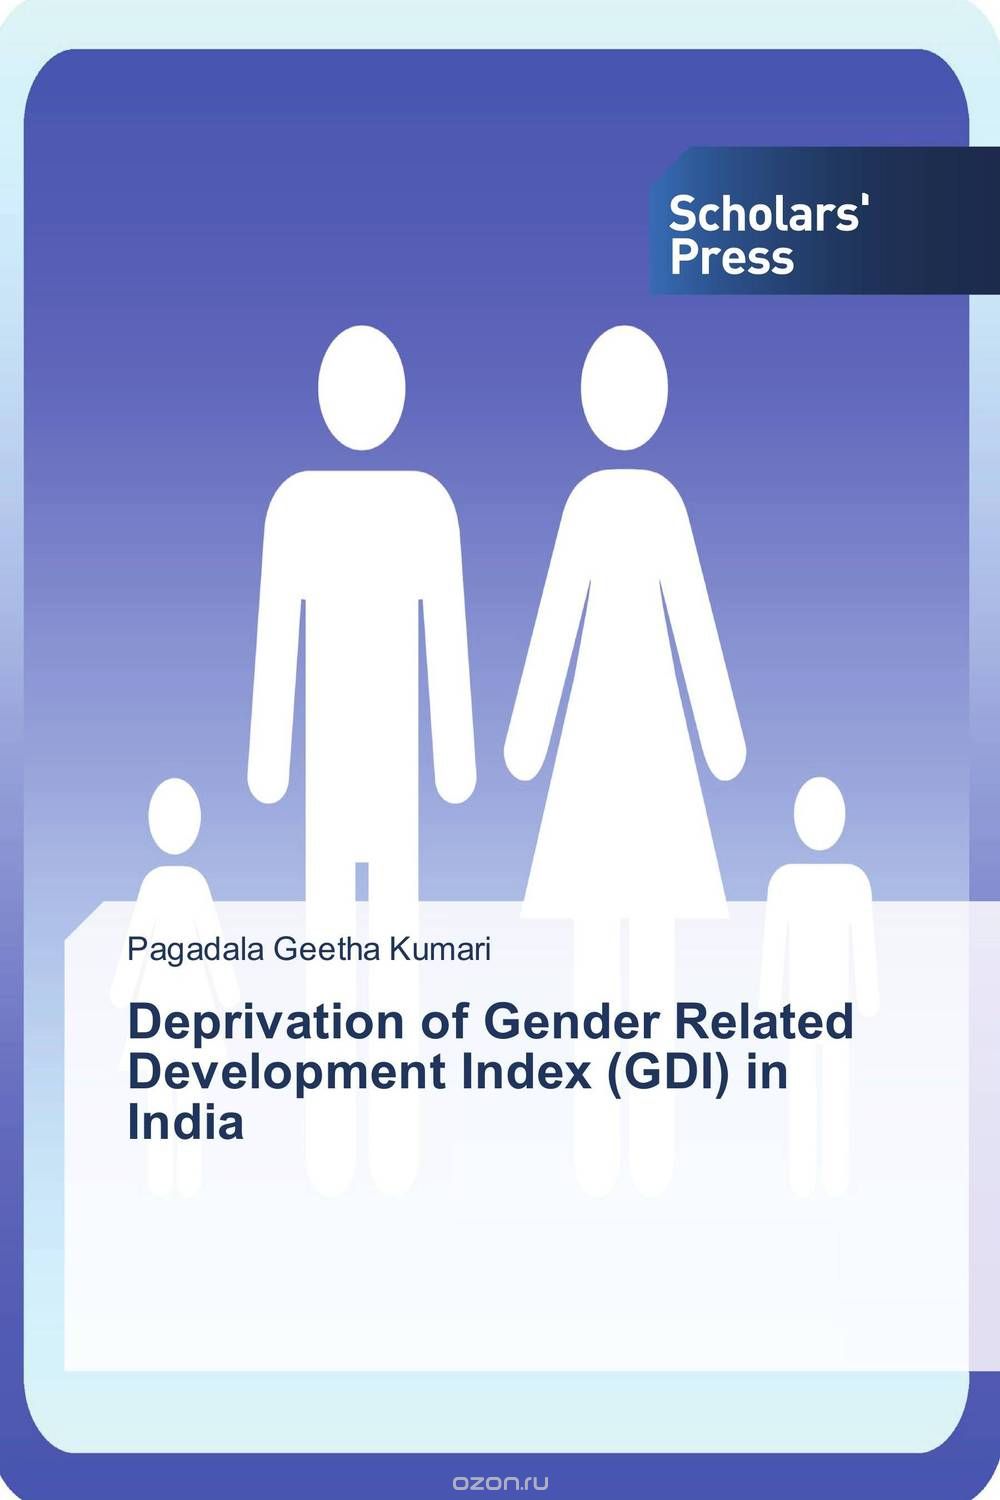 Deprivation of Gender Related Development Index (GDI) in India